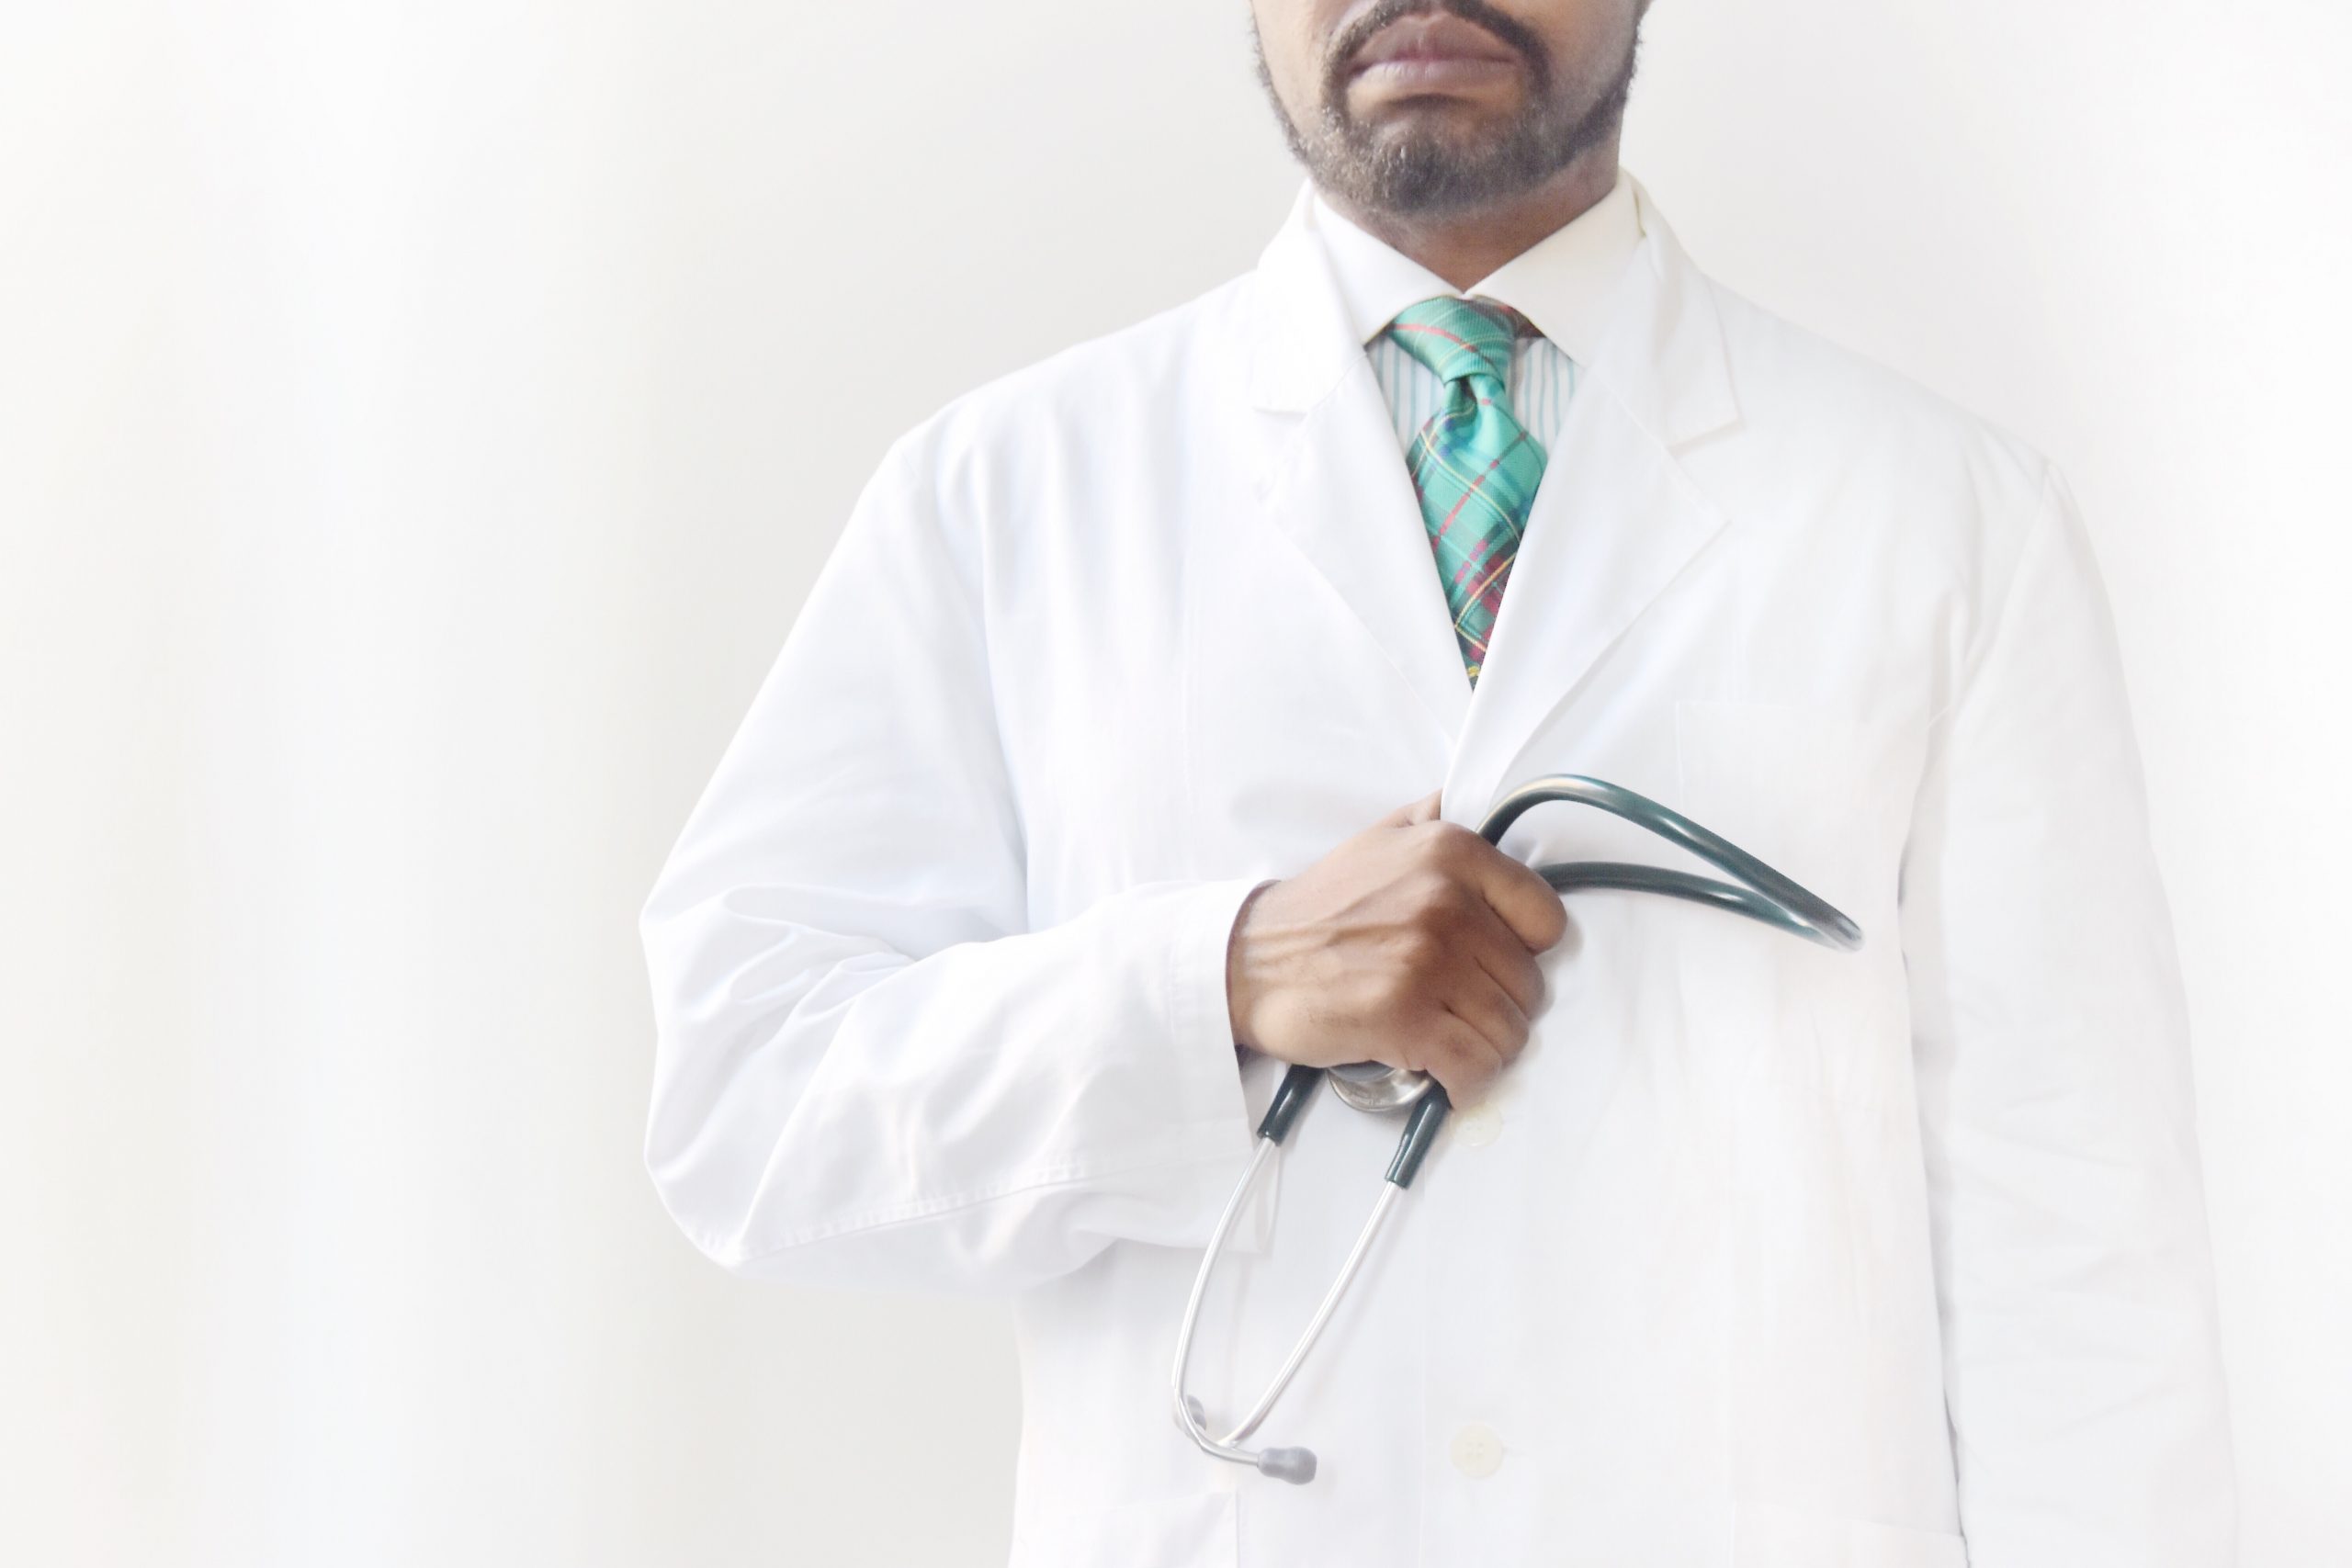 Medical professional standing with stethoscope